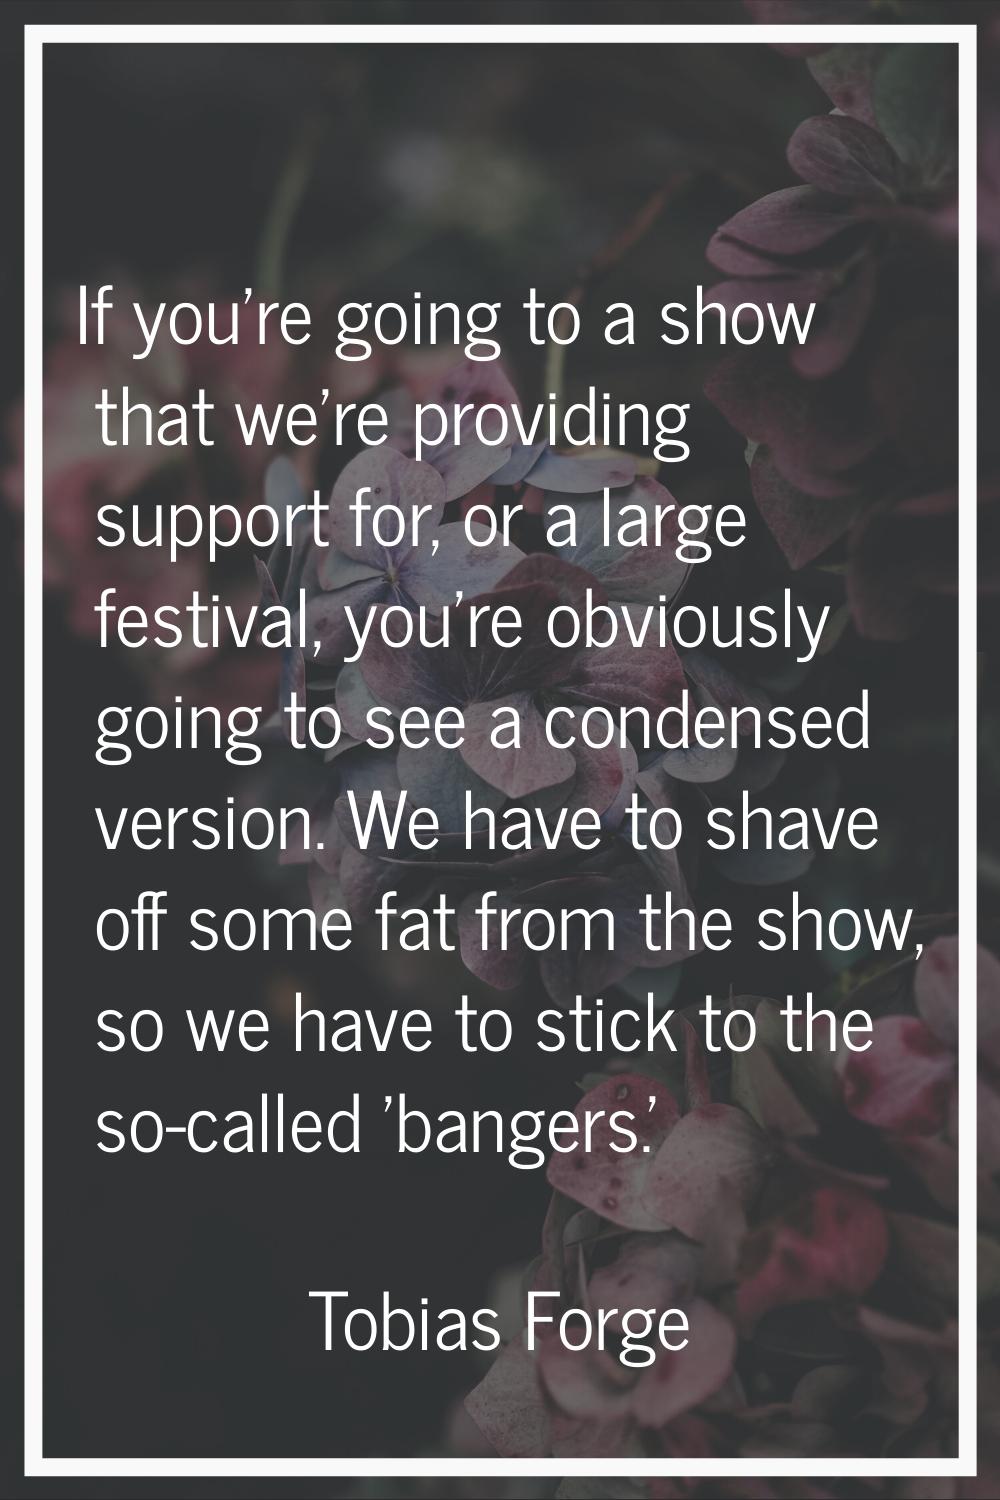 If you're going to a show that we're providing support for, or a large festival, you're obviously g